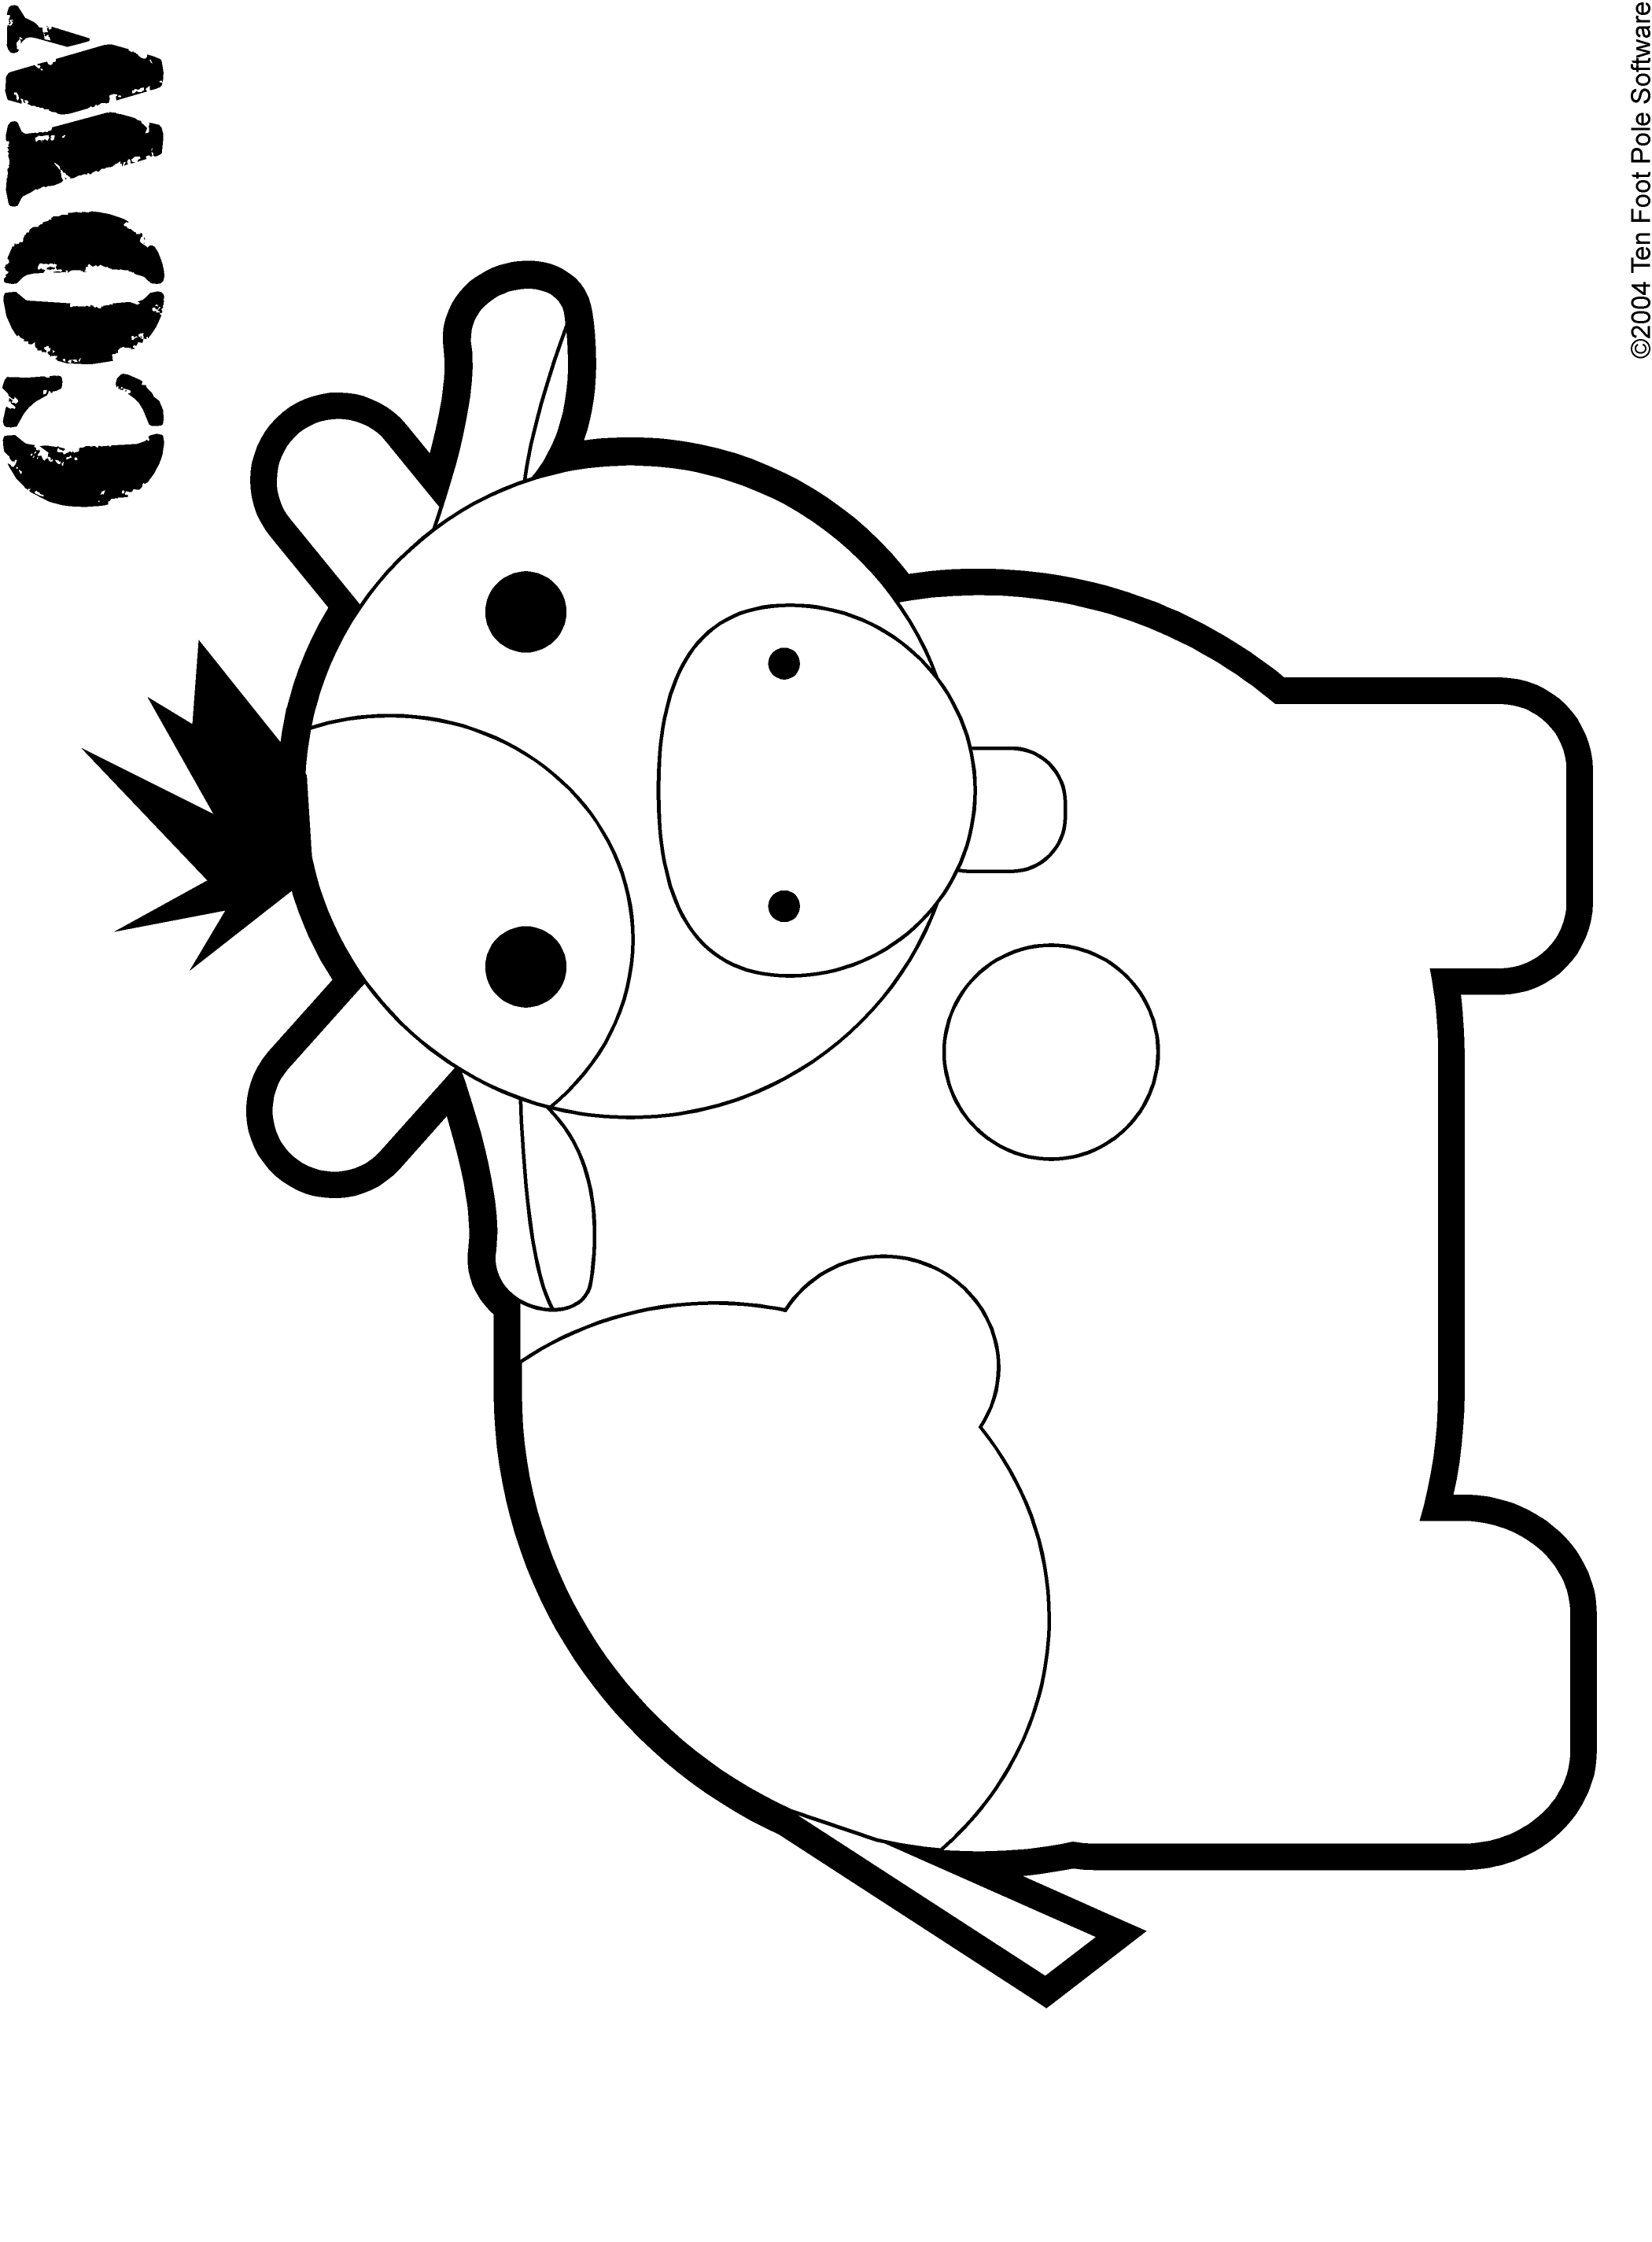 Kindergarten Coloring Pages | Free download on ClipArtMag